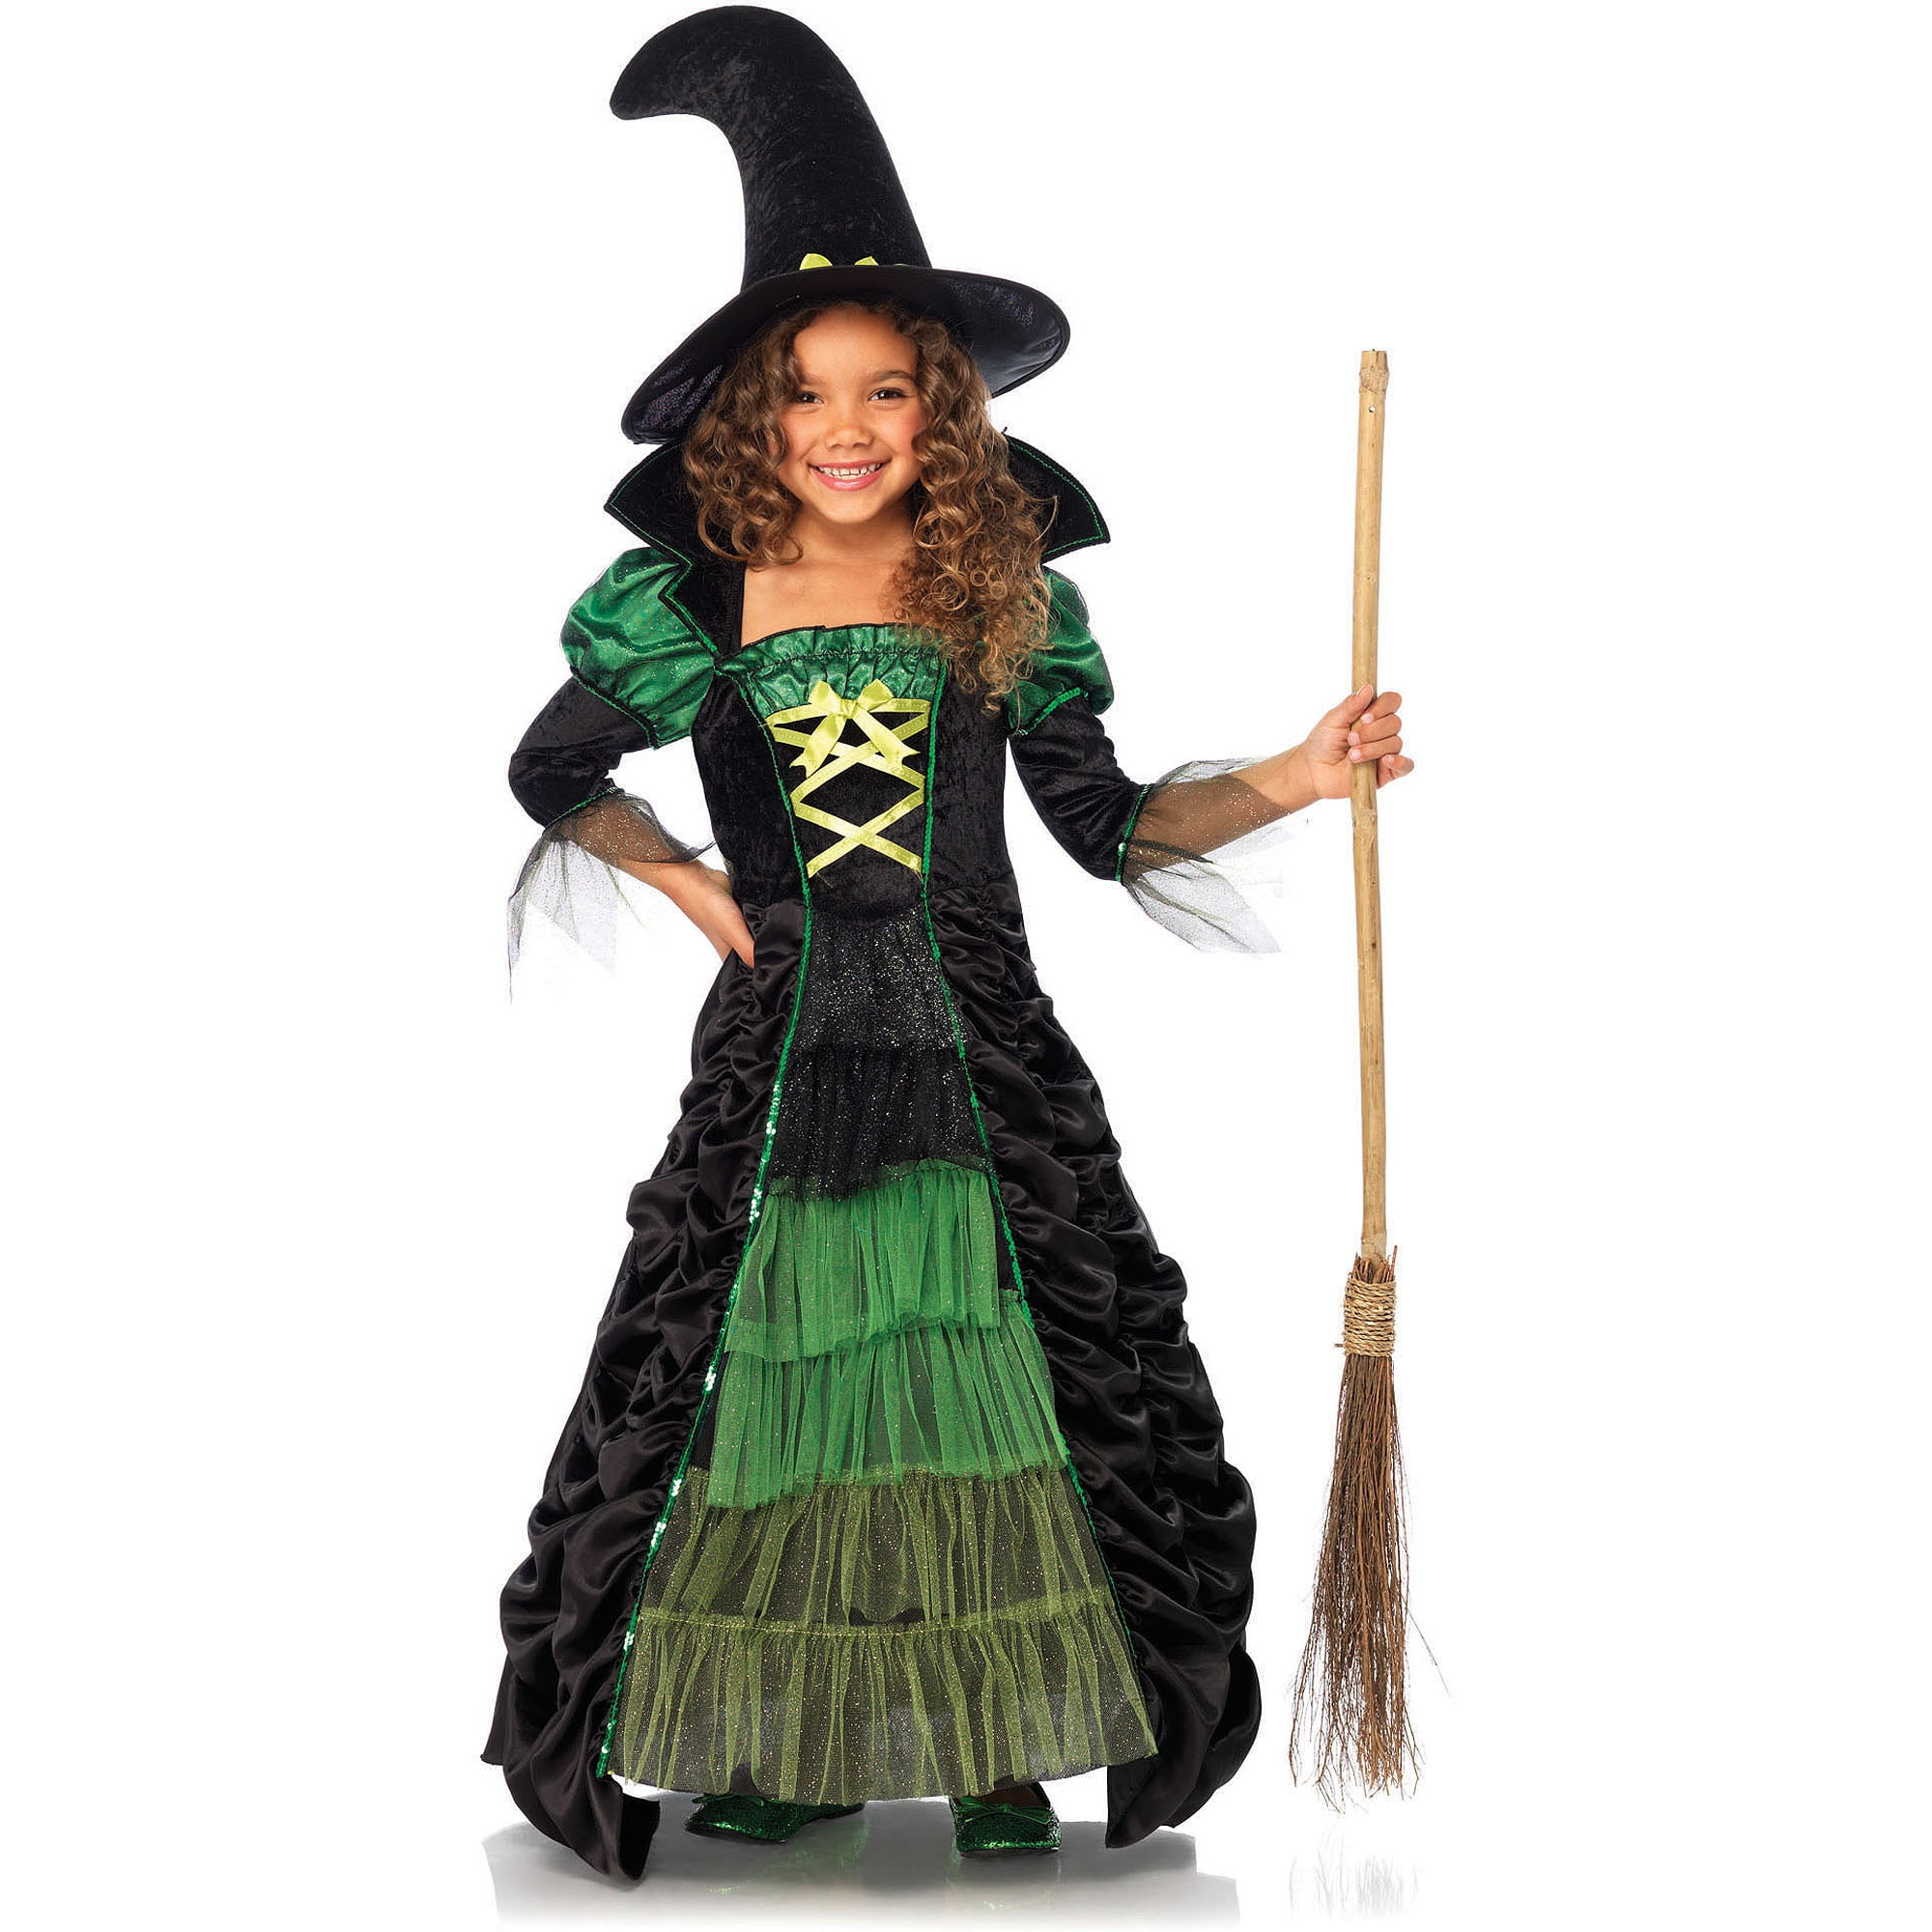 Childrens Girls Lil Witch Halloween Party Costume Fancy Dress Outfit 4-6 Years 